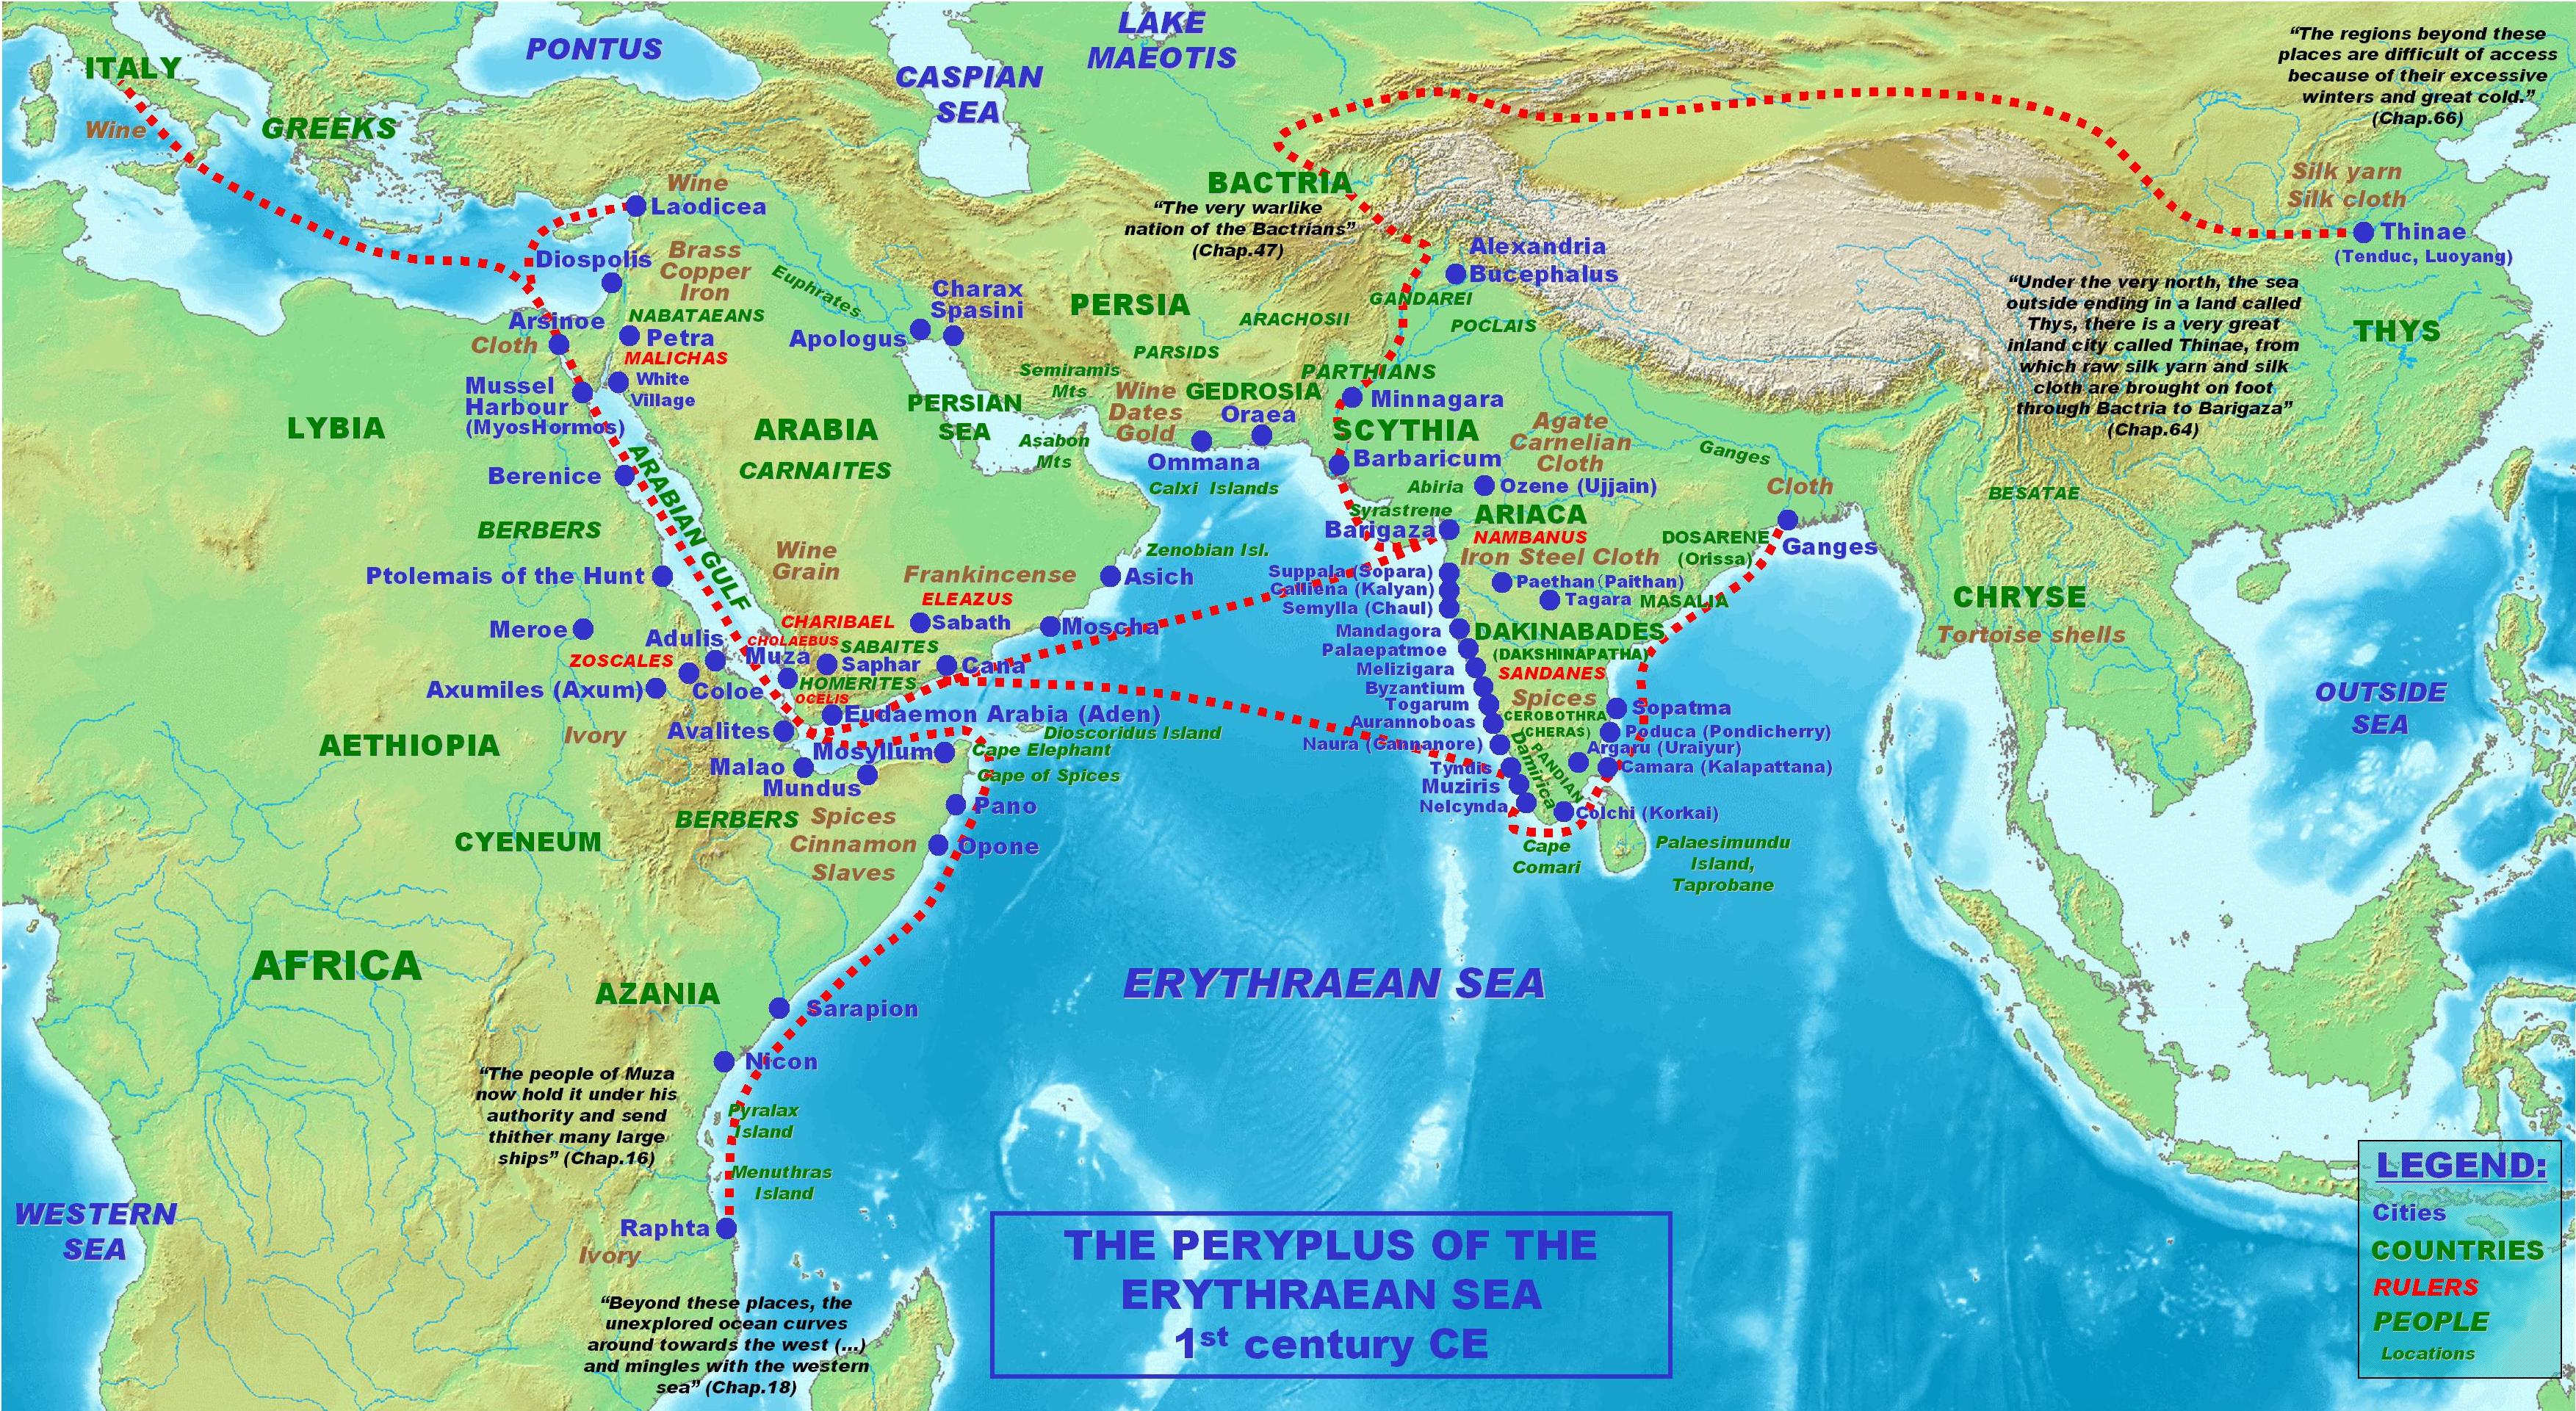 Map of the Periplus of the Erythraean Sea